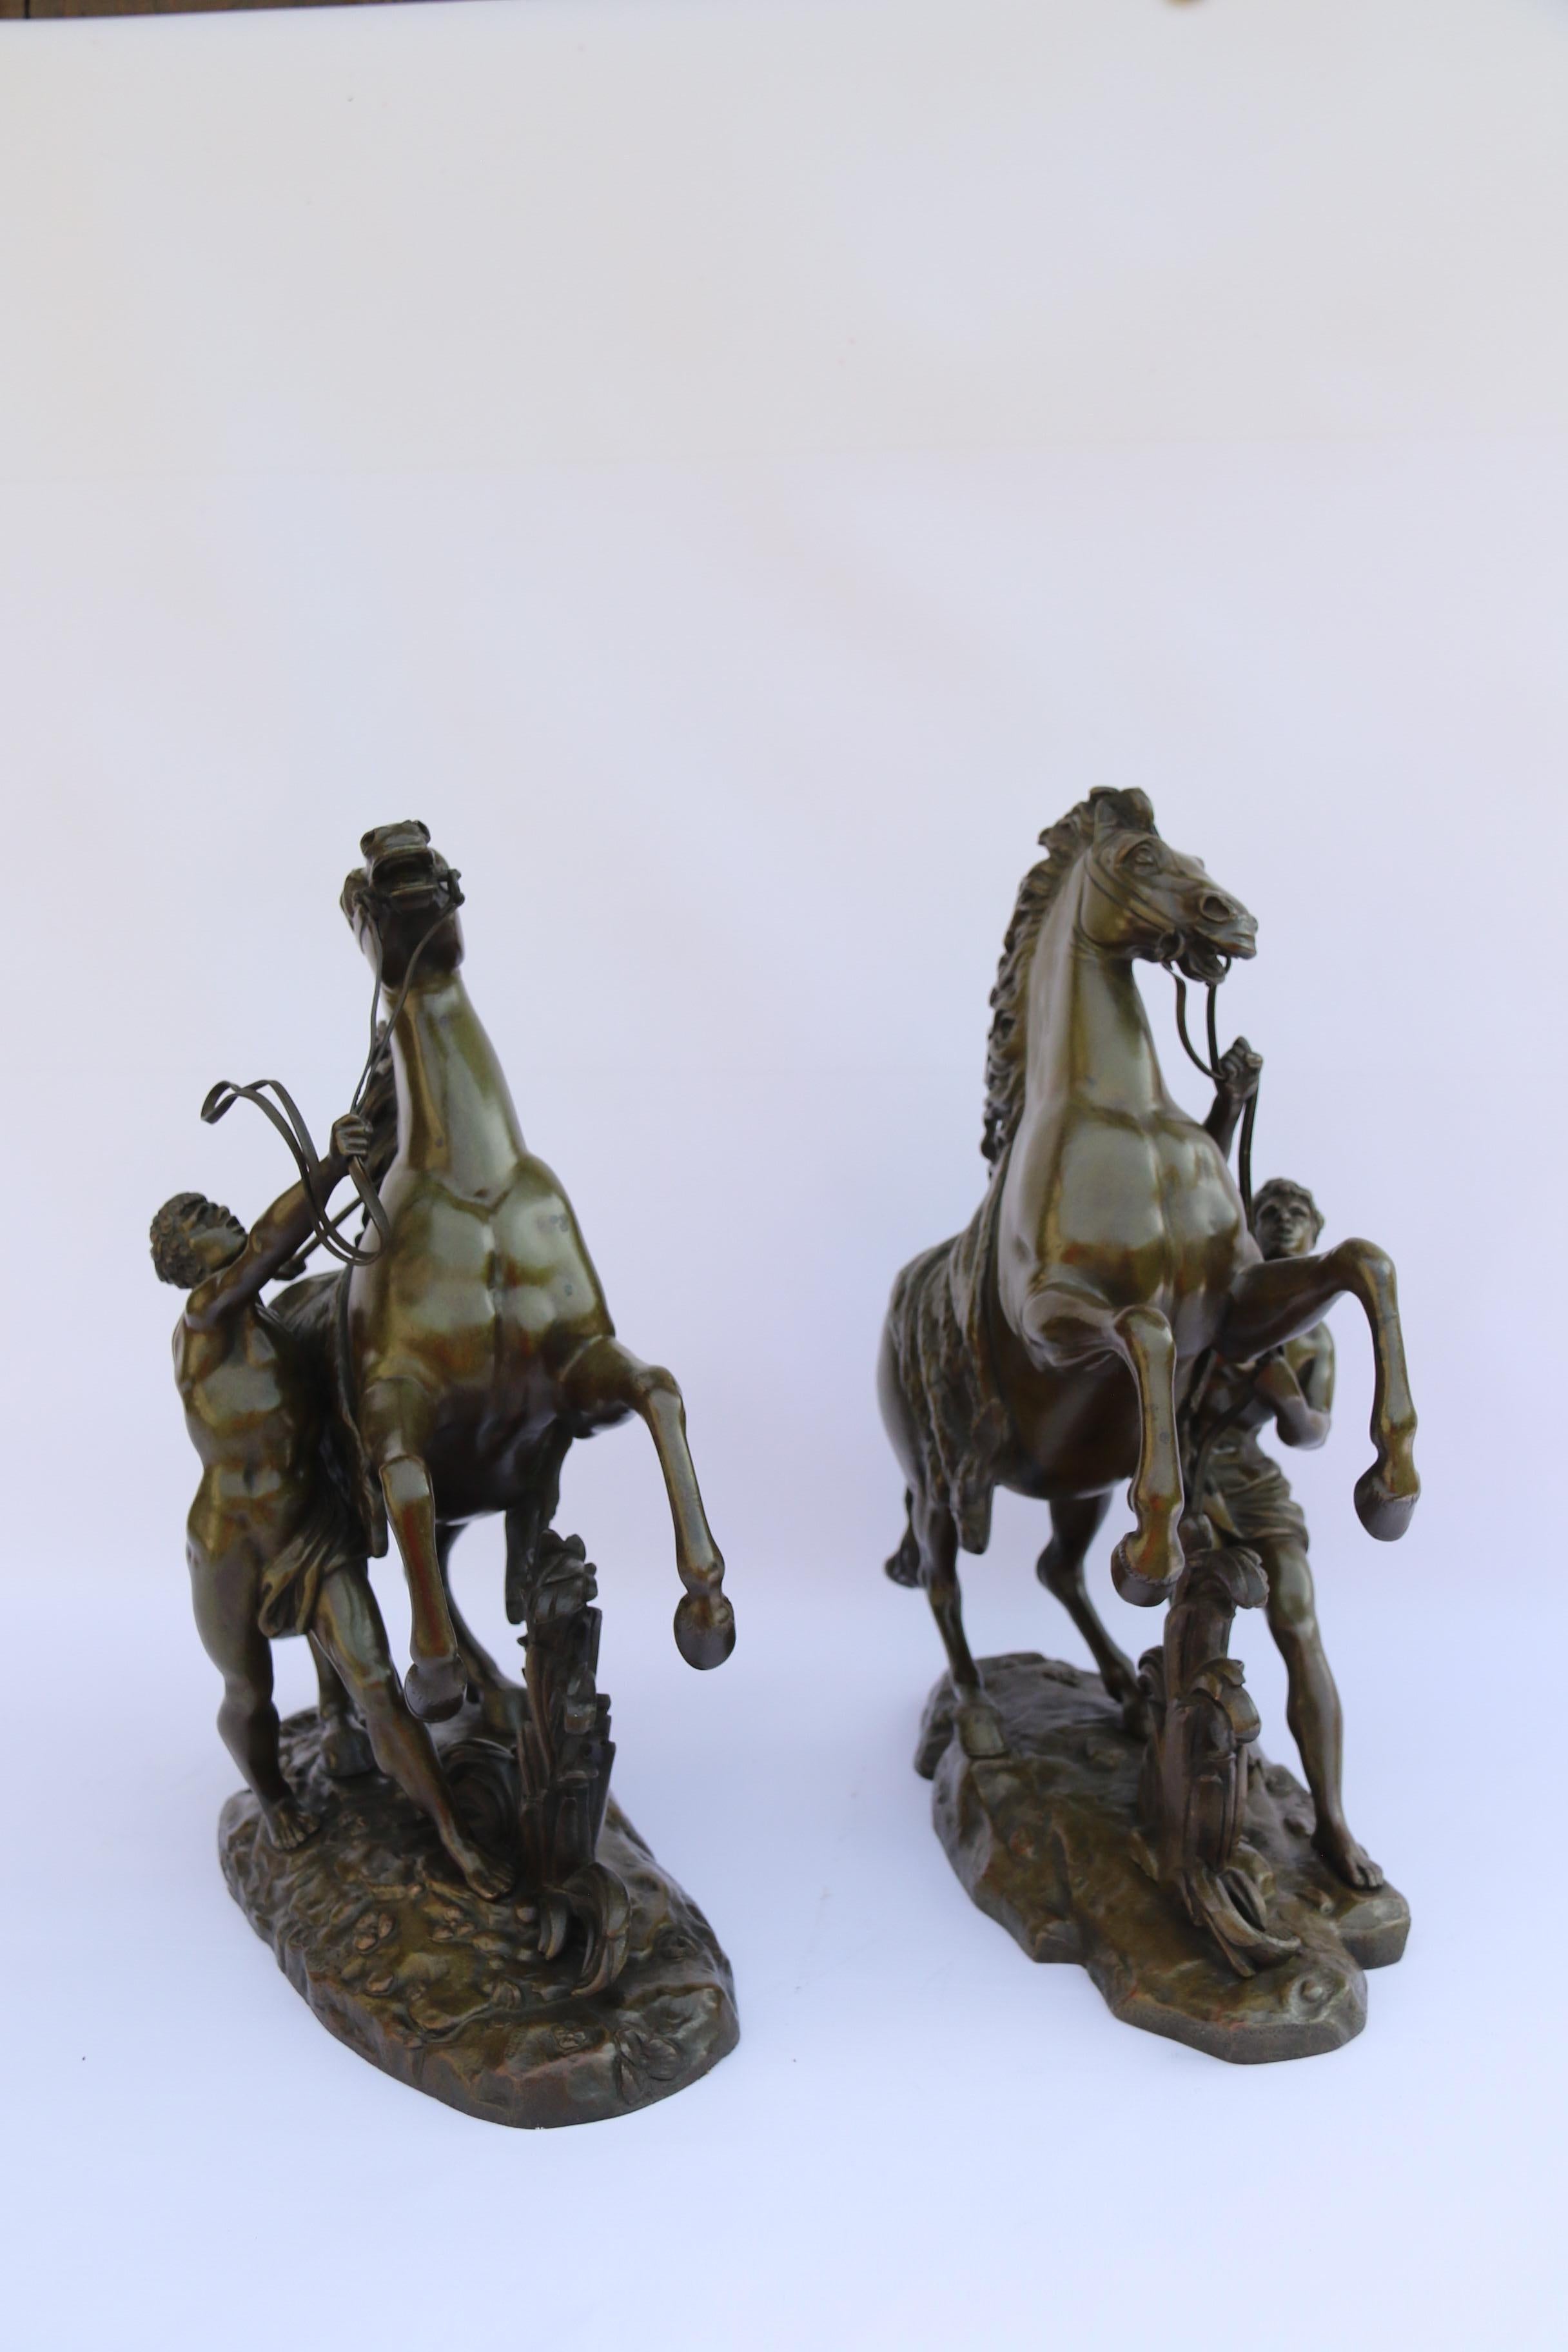 This fantastic pair of 19th century finely sculpted, large scale bronze figures are after Guillaume Costou (1677 – 1746. )They each depict a wild prancing horse being restrained by the trainer who has them tethered on a short strap, and they capture